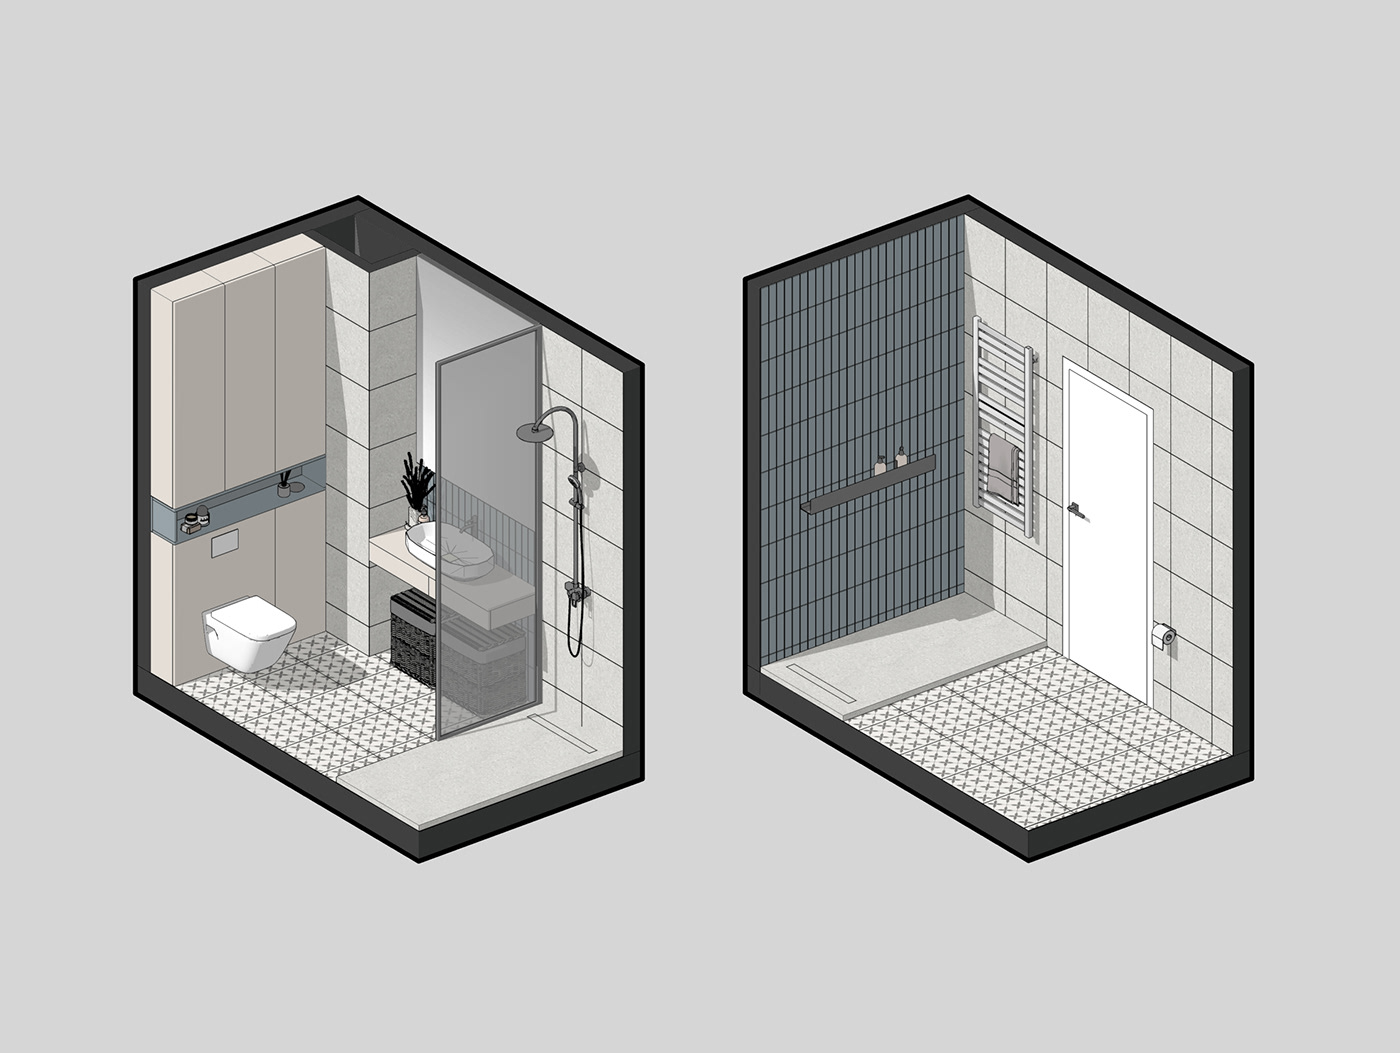 The perspective of the bathroom area.